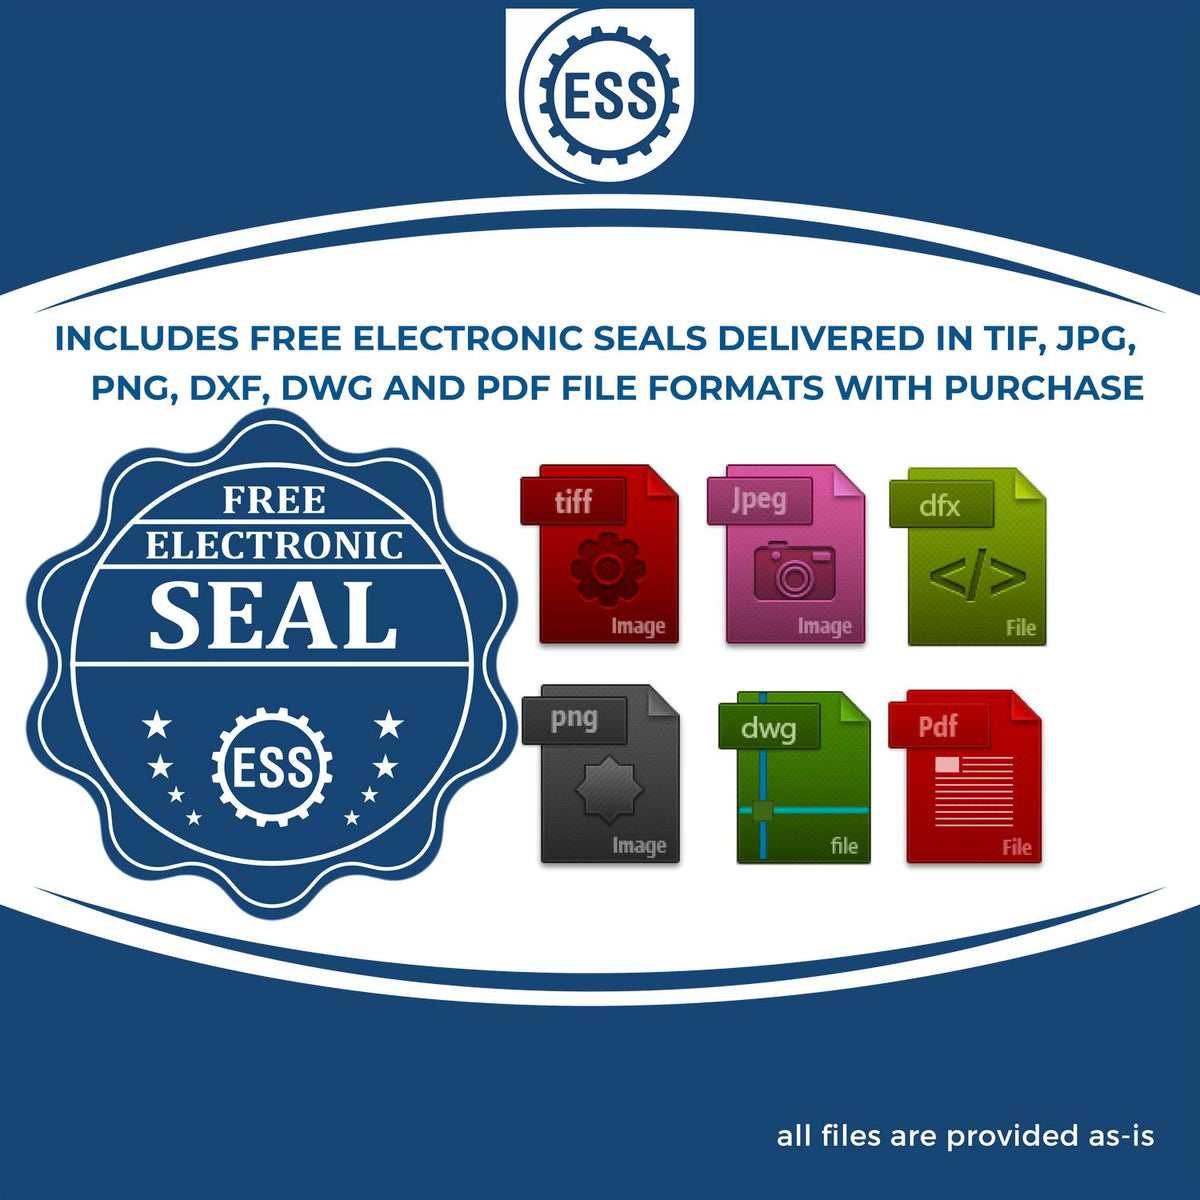 An infographic for the free electronic seal for the Hybrid Idaho Land Surveyor Seal illustrating the different file type icons such as DXF, DWG, TIF, JPG and PNG.